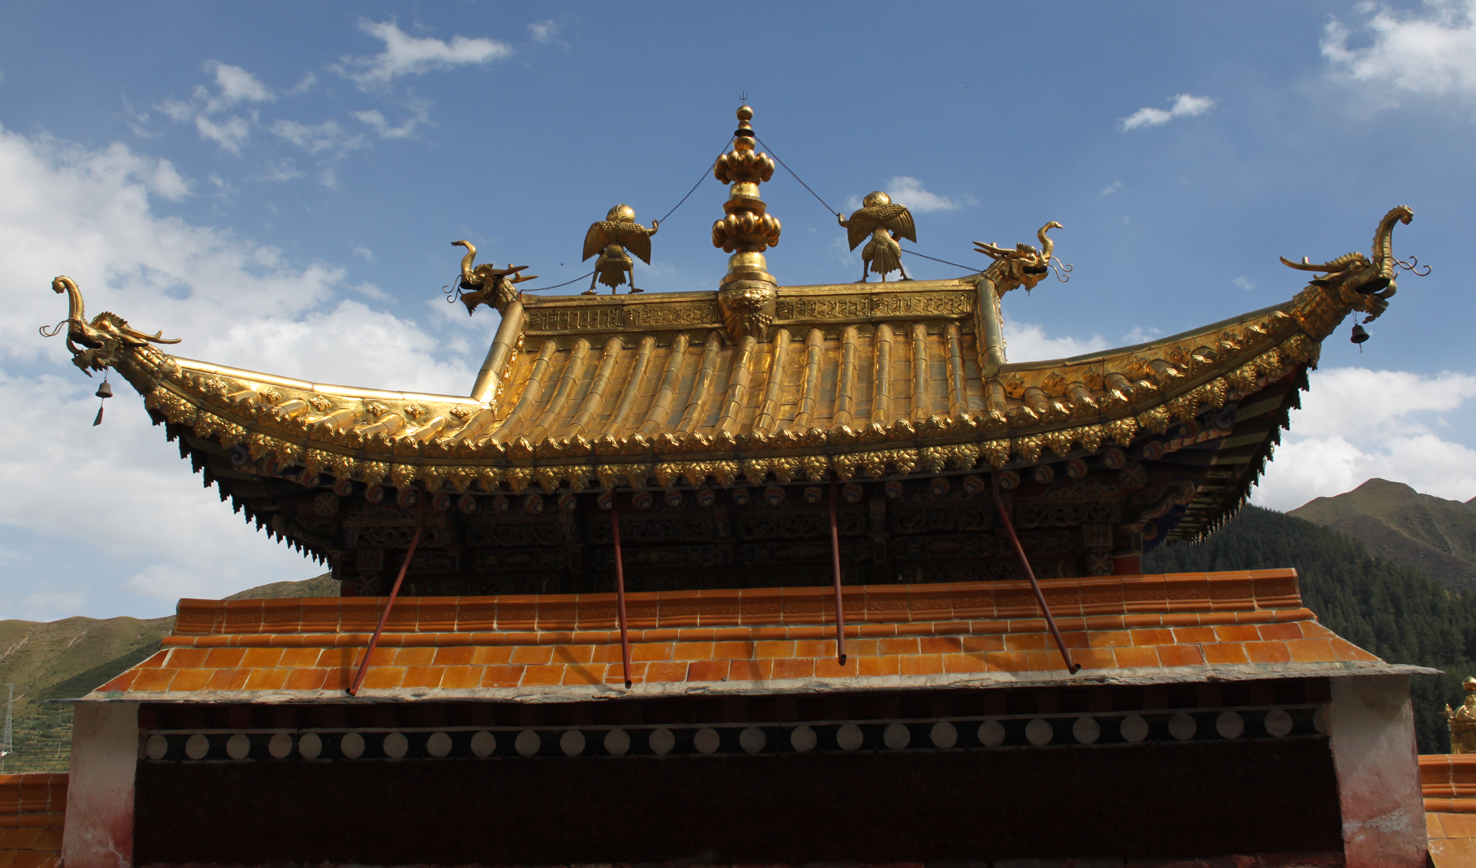 20180920_Kloster-Labrang (451)